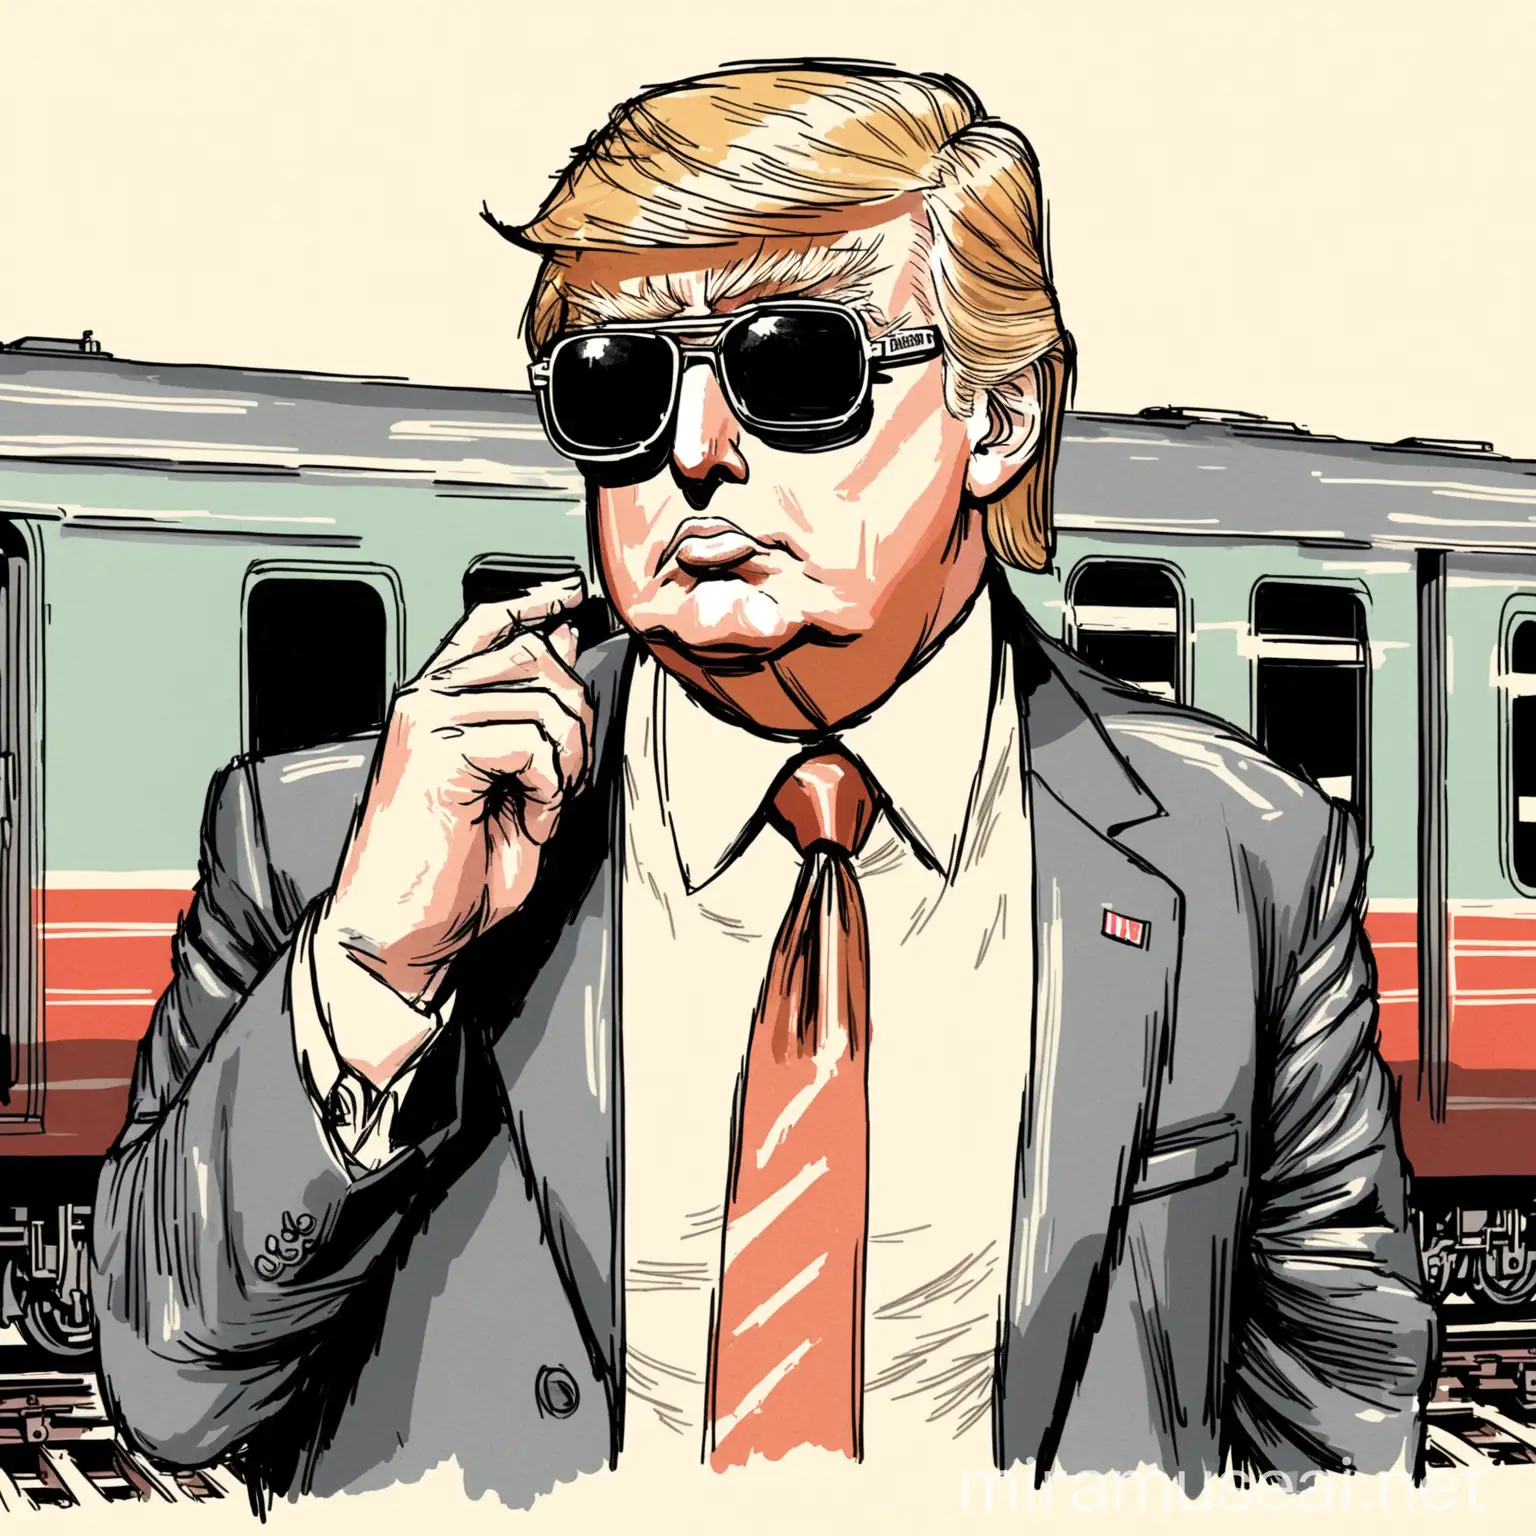 Donald Trump Wearing Sunglasses with Train Background